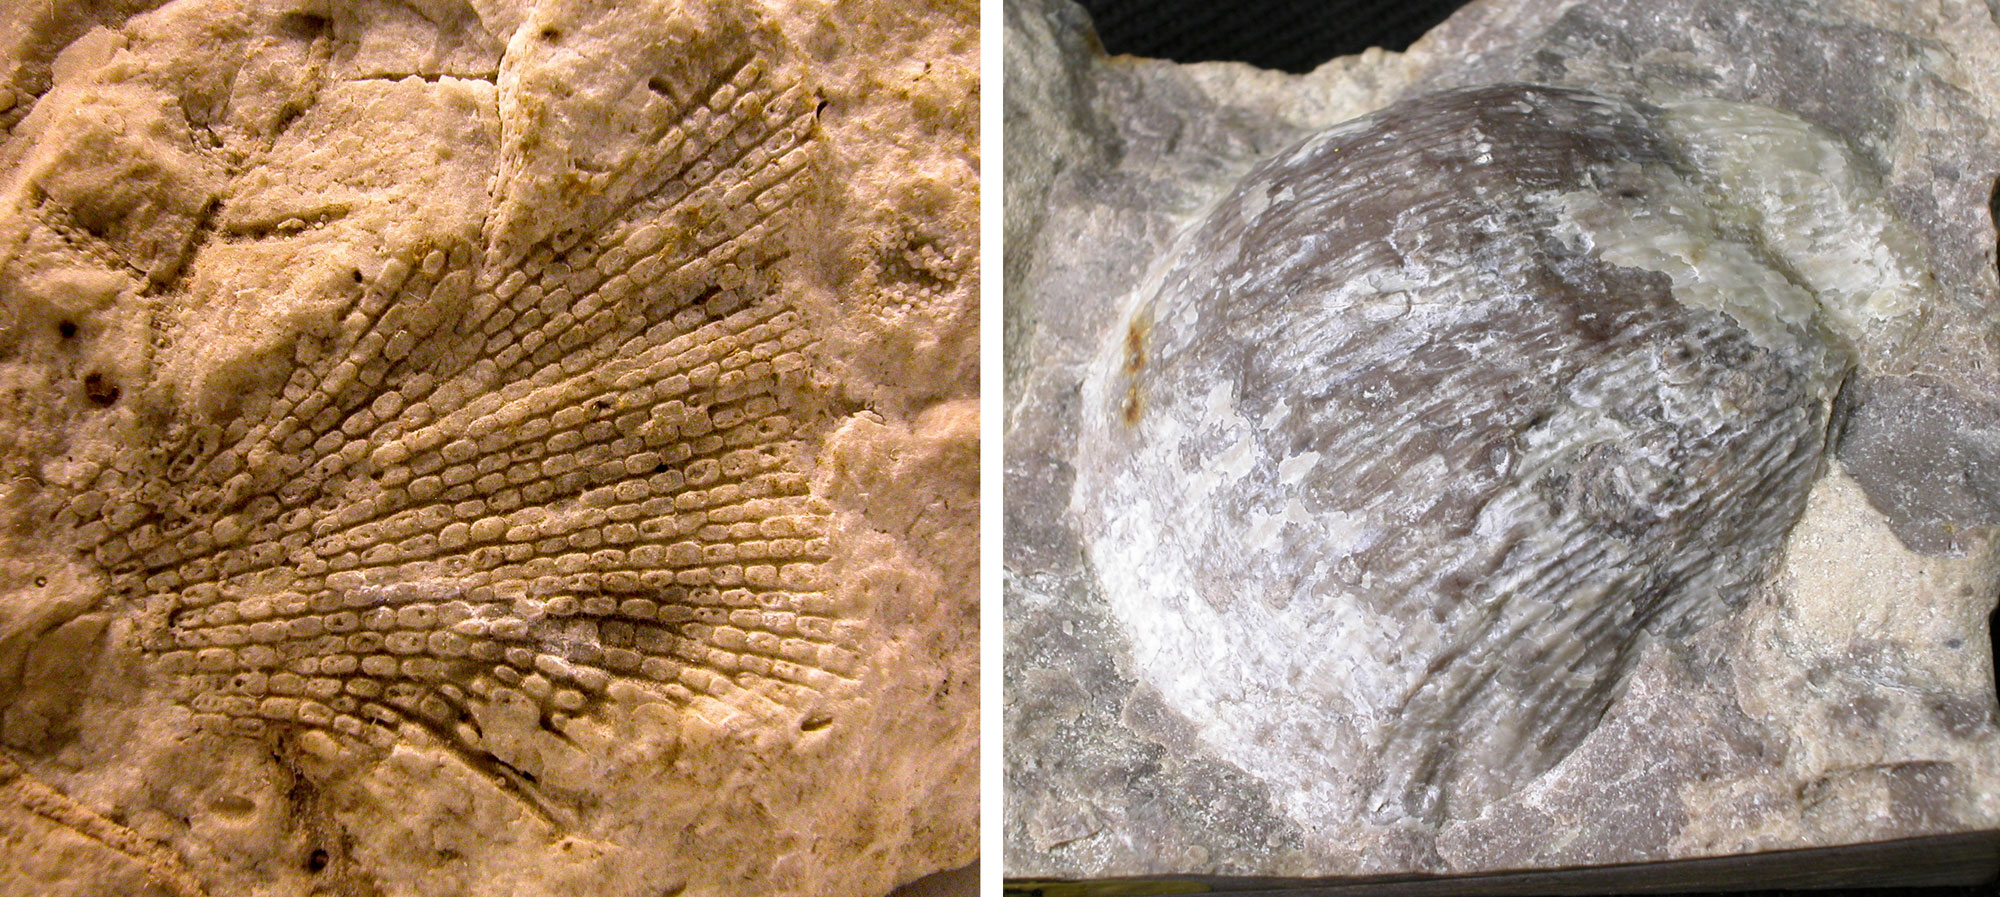 2-panel figure of Mississippian marine invertebrate fossils from the Redwall Limestone, Grand Canyon. Panel 1: Photo of a bryozoan. The fossil looks like a flat, netted impression in beige rock. Panel 2: Photo of a brachiopod. The photo shows a single striate valve preserved in gray rock.